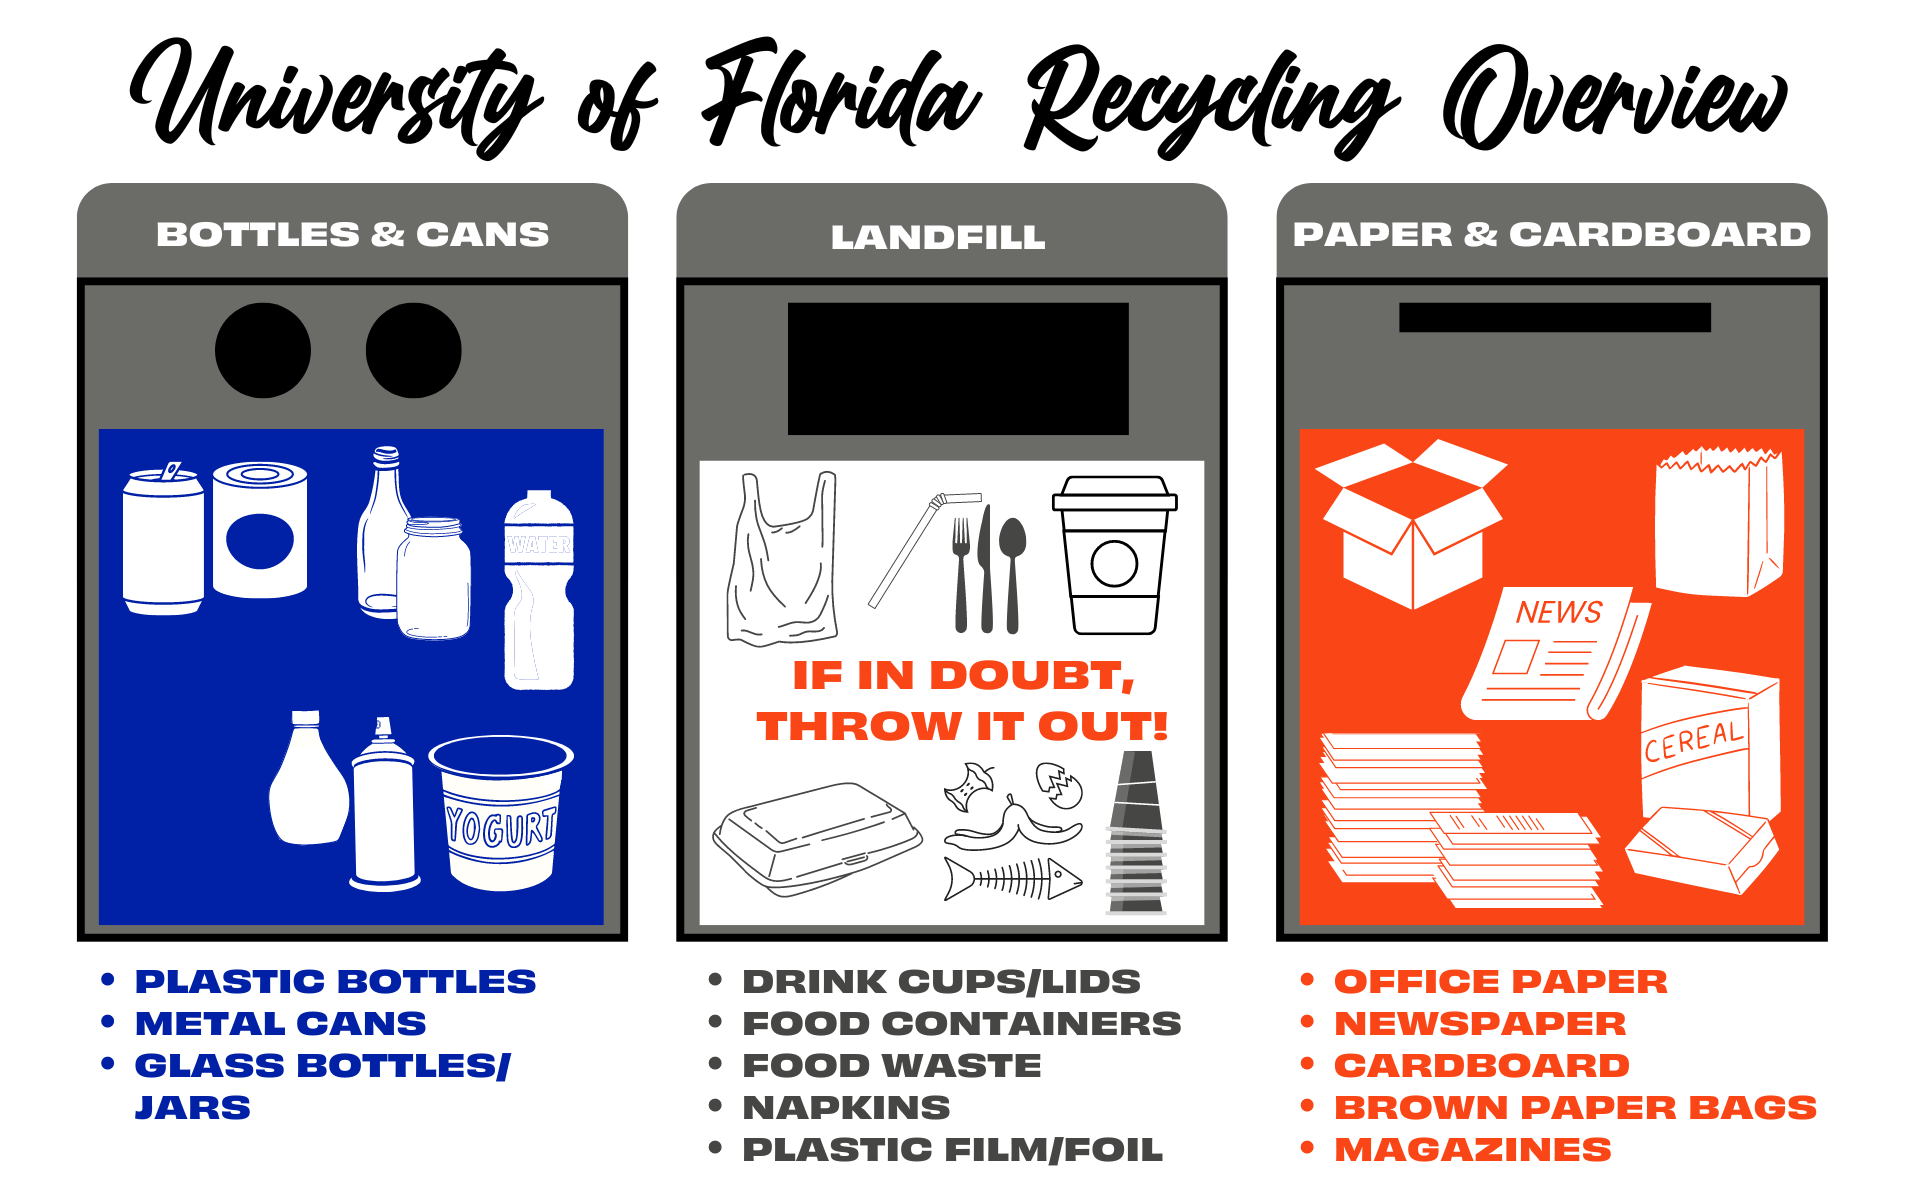 Graphic overview of the three different waste bins for recycling and landfill at UF and in Gainesville.